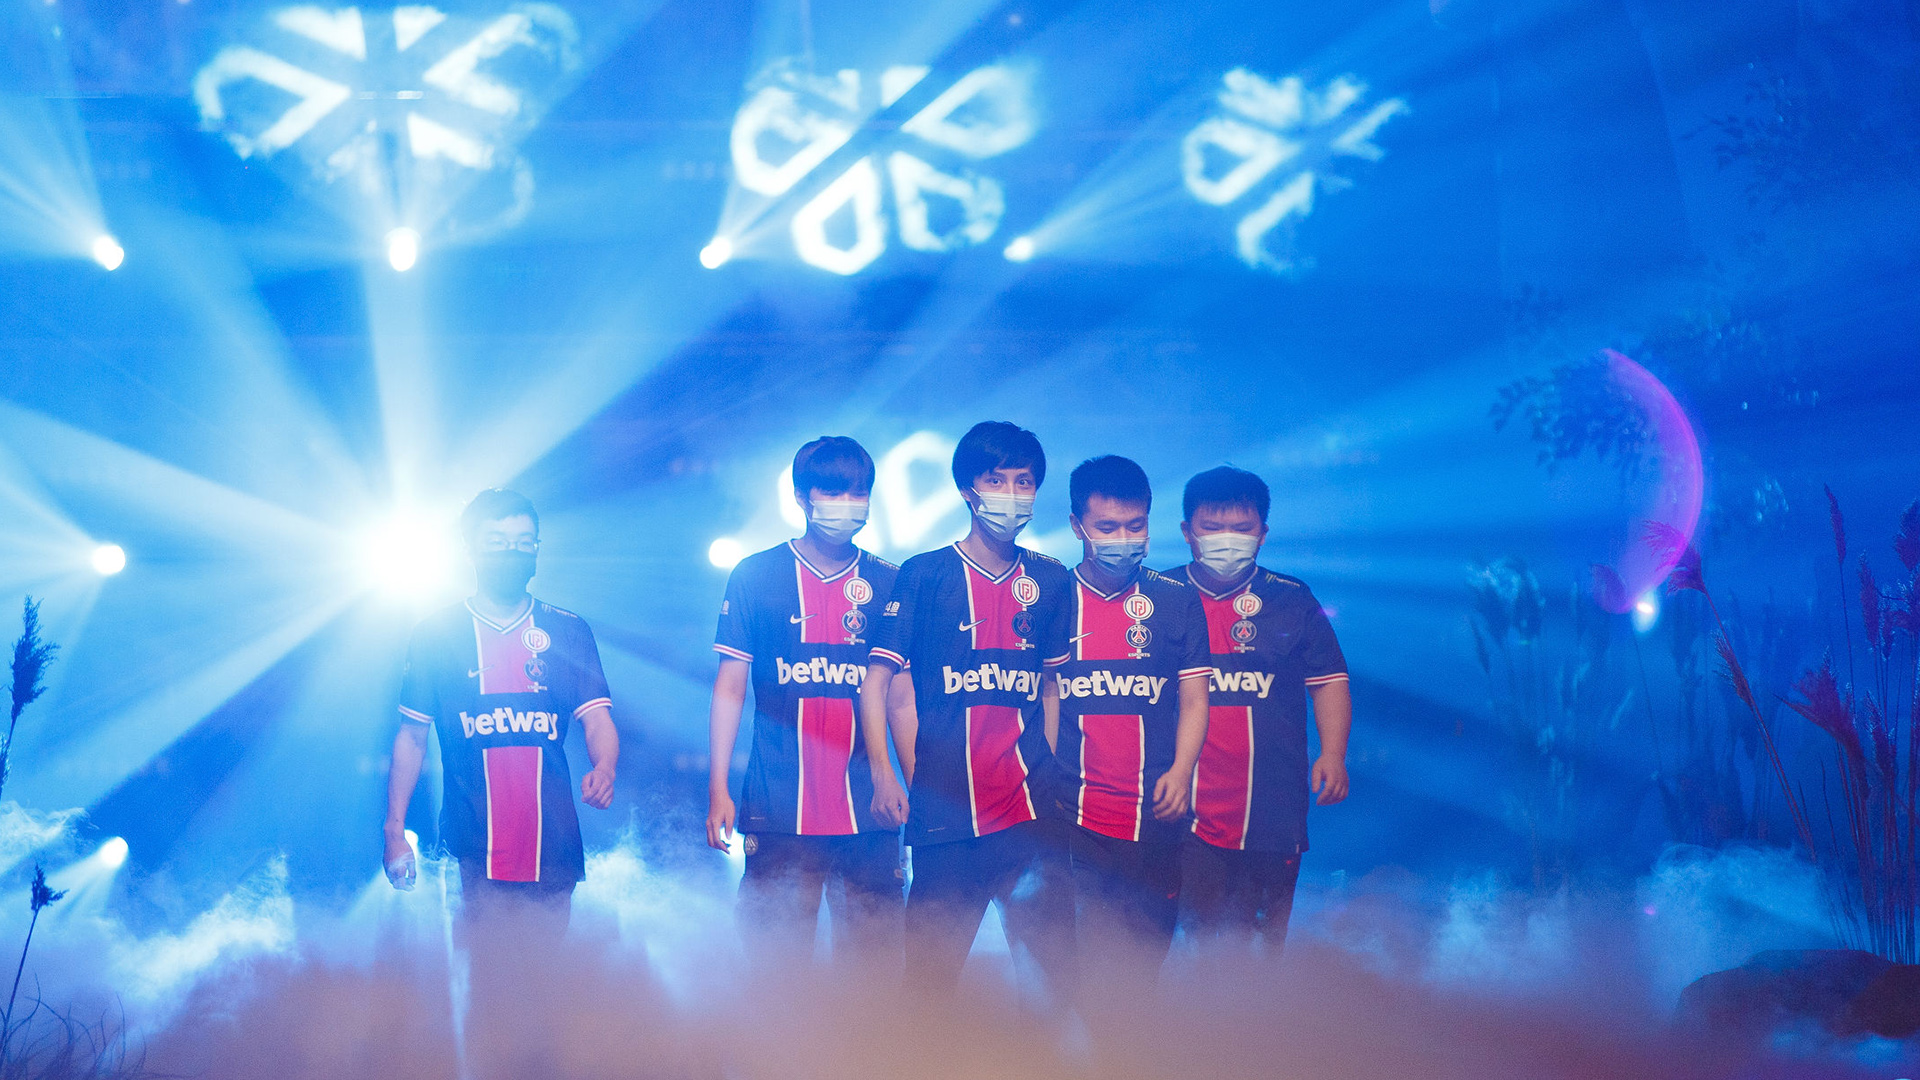 PSG.LGD wins OGA Dota Pit after a stunning performance by Ame's Sven